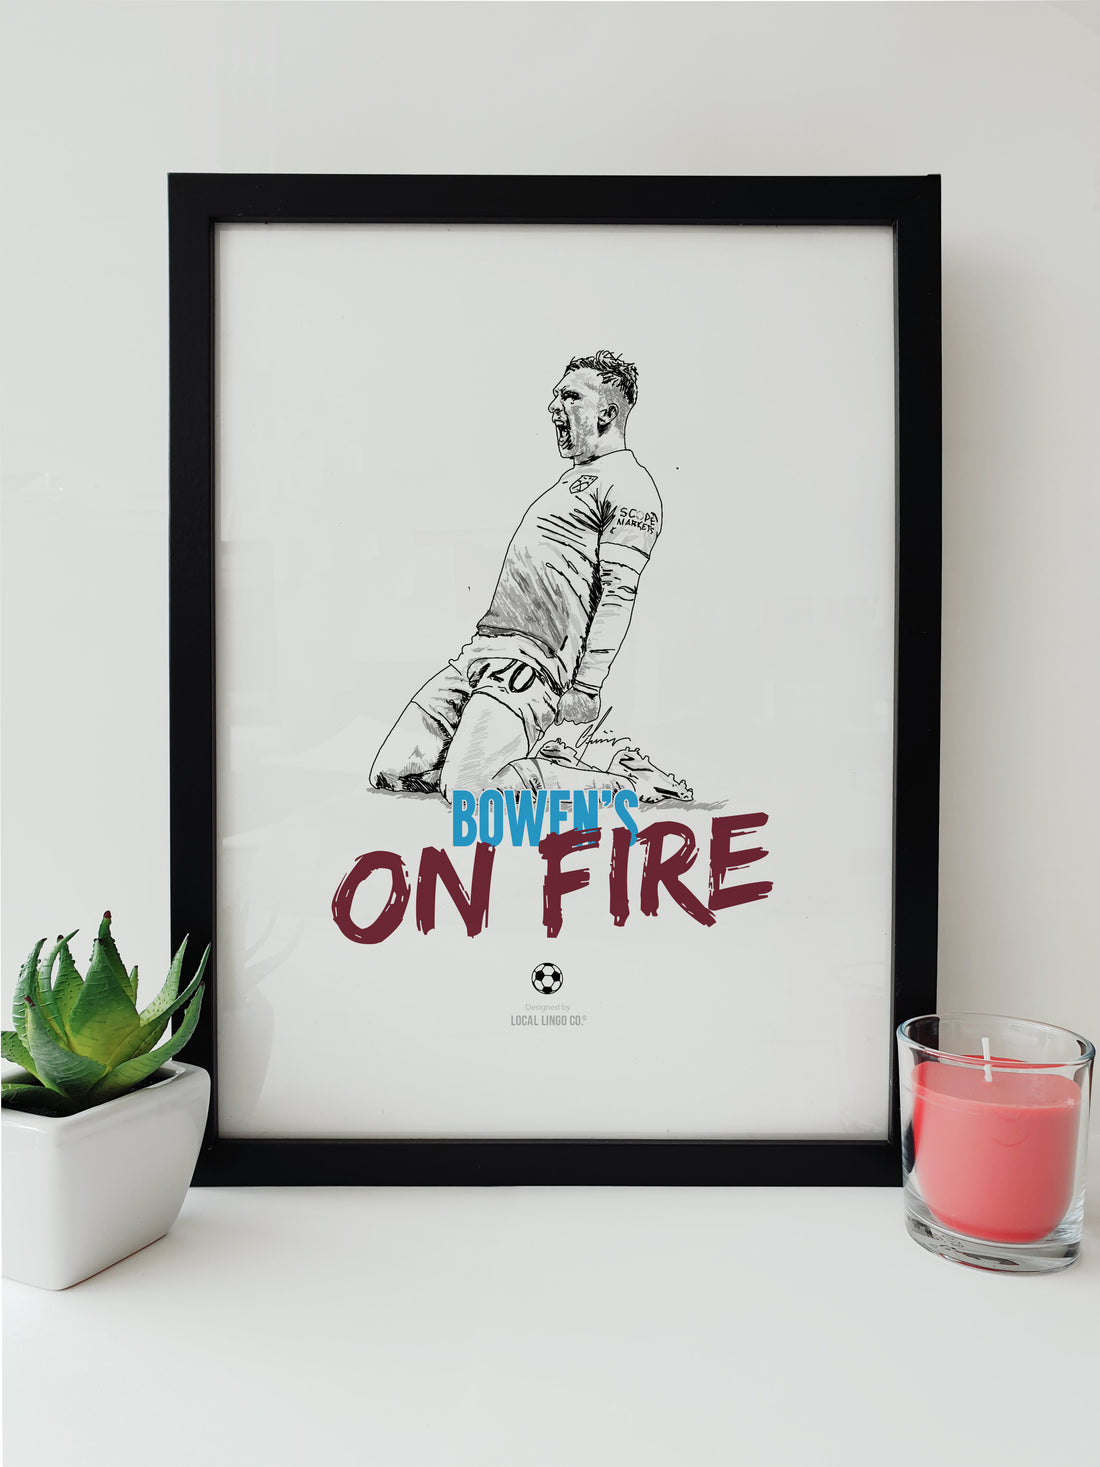 West Ham United FC themed print by Local Lingo - High-quality art print featuring an illustration of Jarrod Bowen celebrating his winning goal in the 90th minute of the Europa Conference League Final. The print showcases the iconic fan chant "Bowen's on Fire" and commemorates the team's victory. A perfect addition to any Hammers fan's collection and a great way to display team pride.